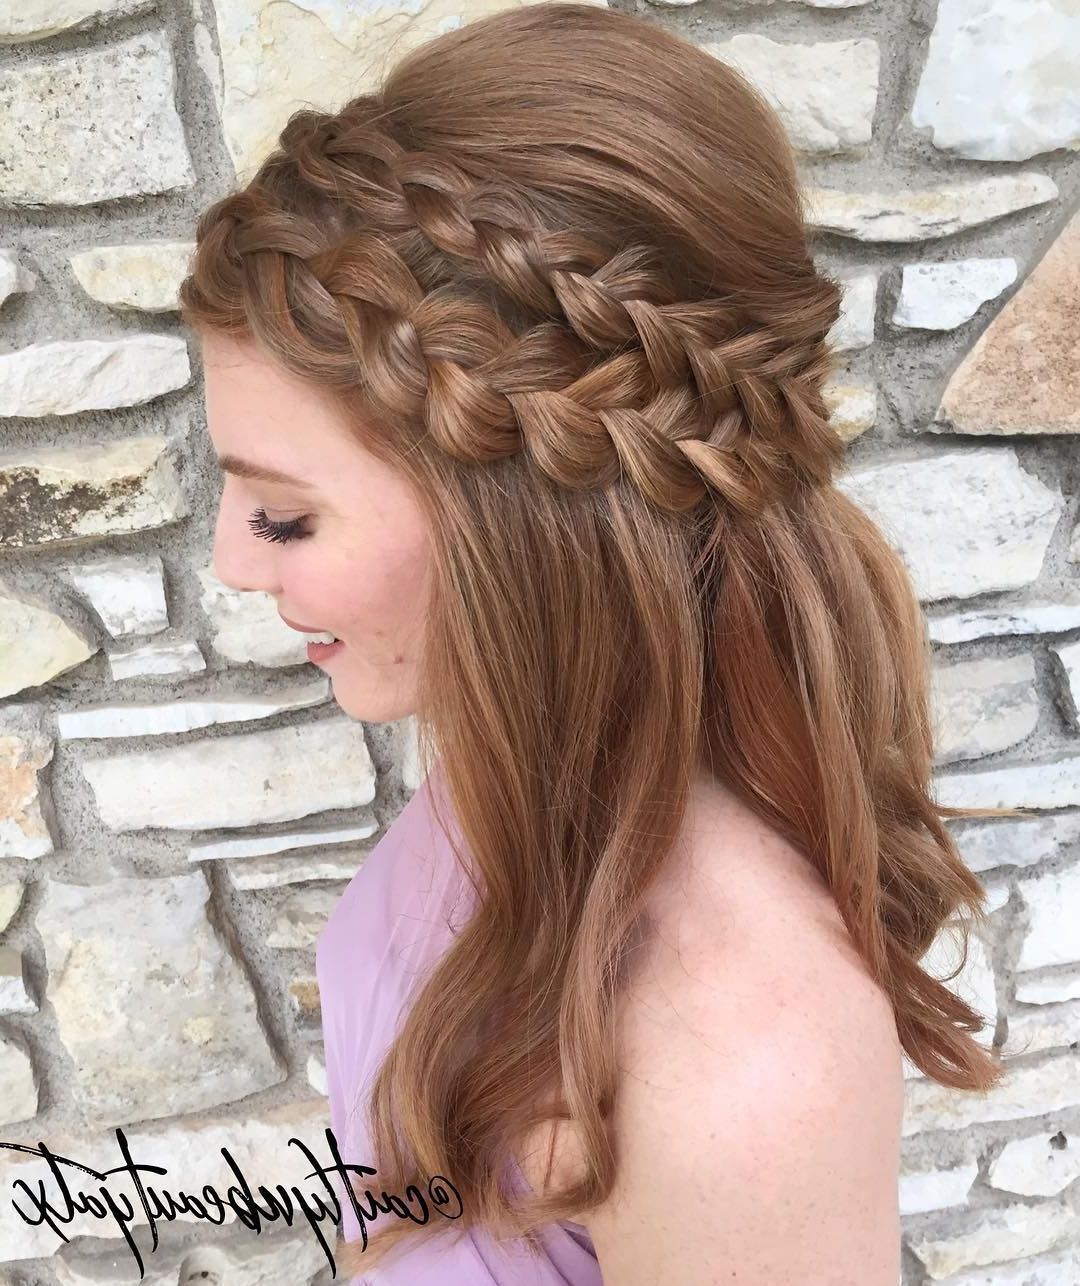 Most Recent Double Braided Prom Updos Within Double French Dutch Braid Half Up, Half Down Style (View 4 of 20)